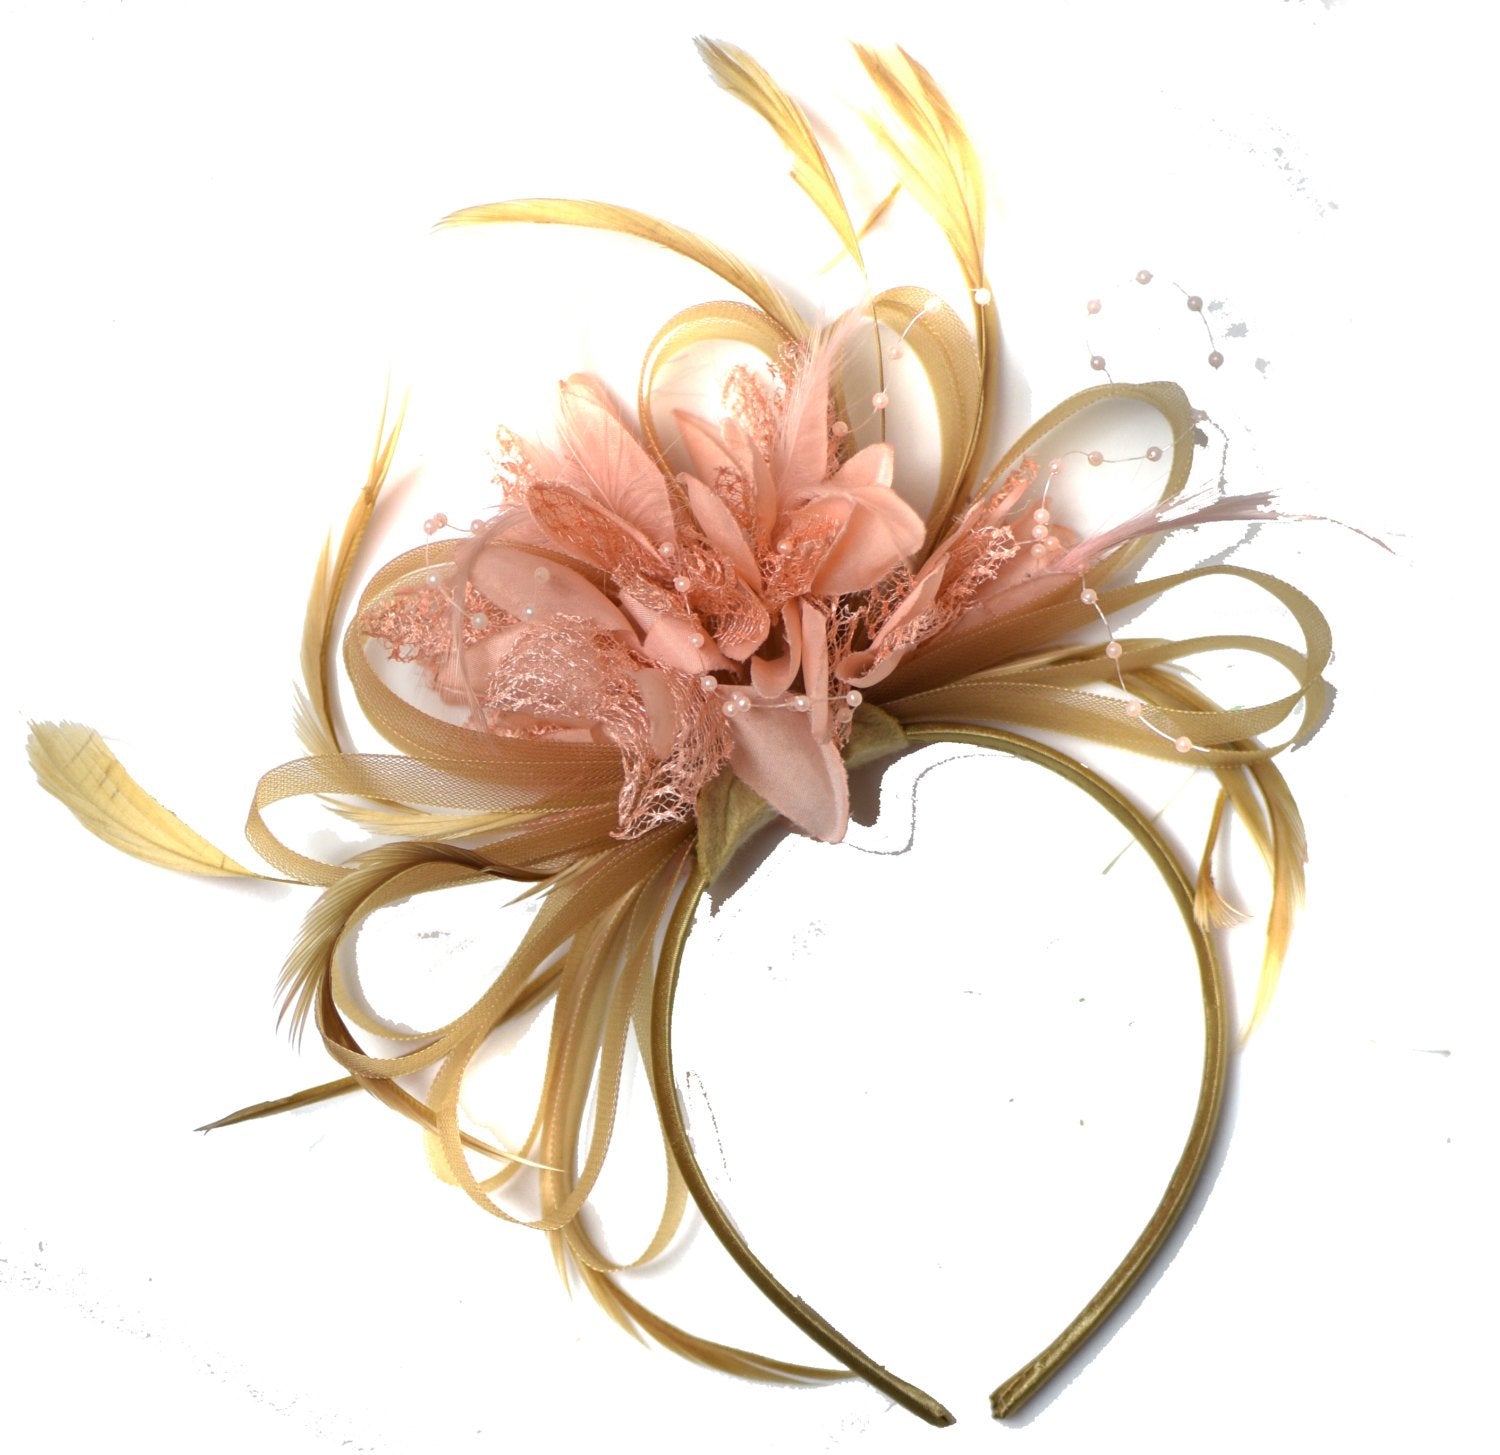 Caprilite Champagne Gold Beige Camel and Peach Salmon Pink Fascinator on Headband Alice Band UK Wedding Ascot Races Derby